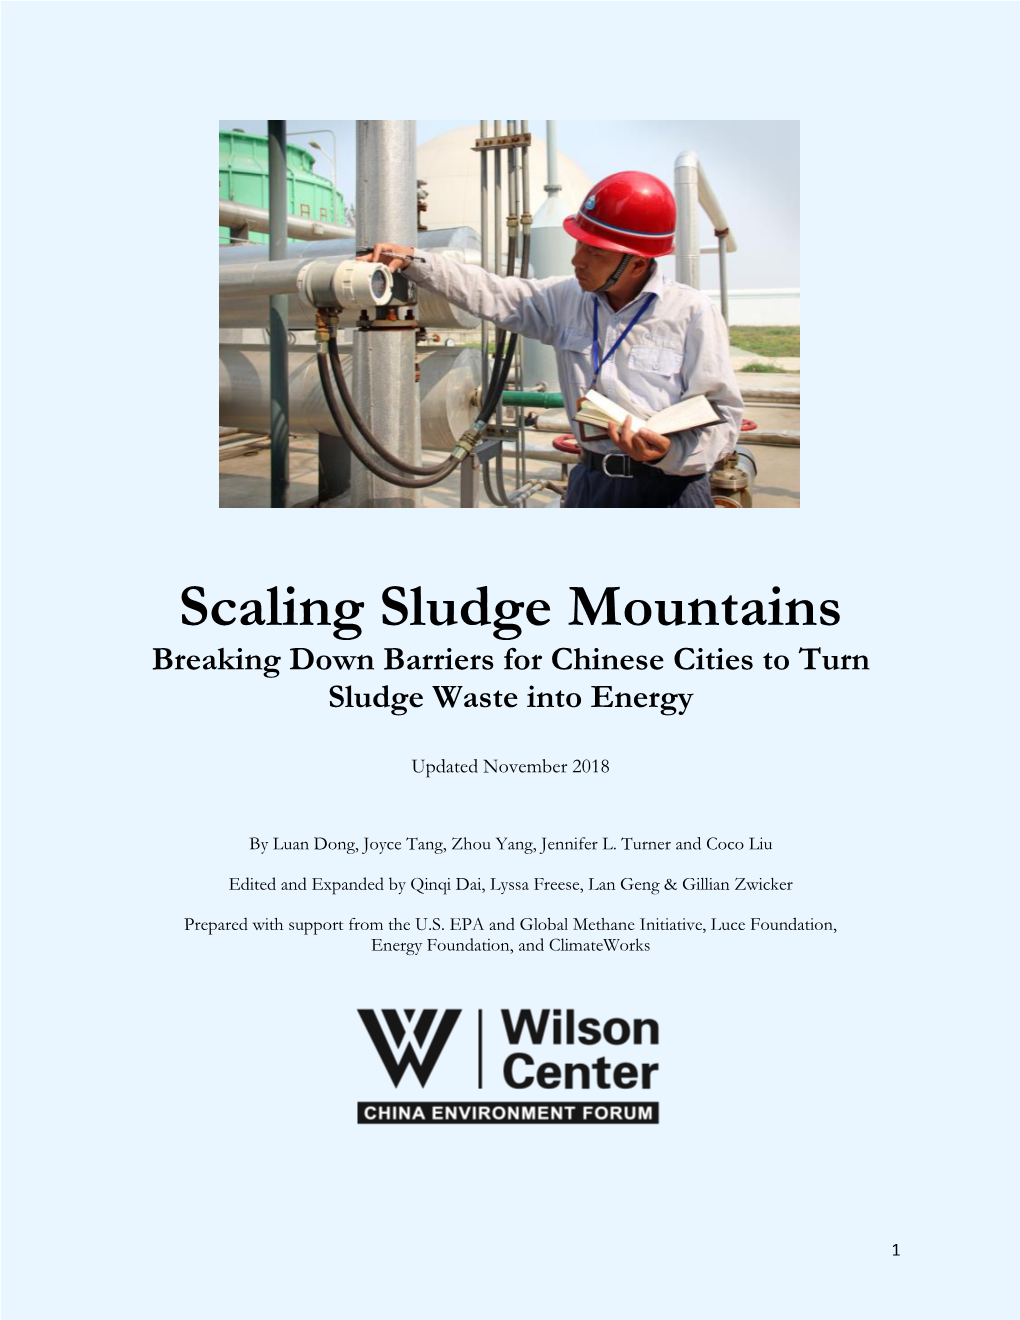 393289300-Scaling-Sludge-Mountains-Breaking-Down-Barriers-For-Chinese-Cities-To-Turn